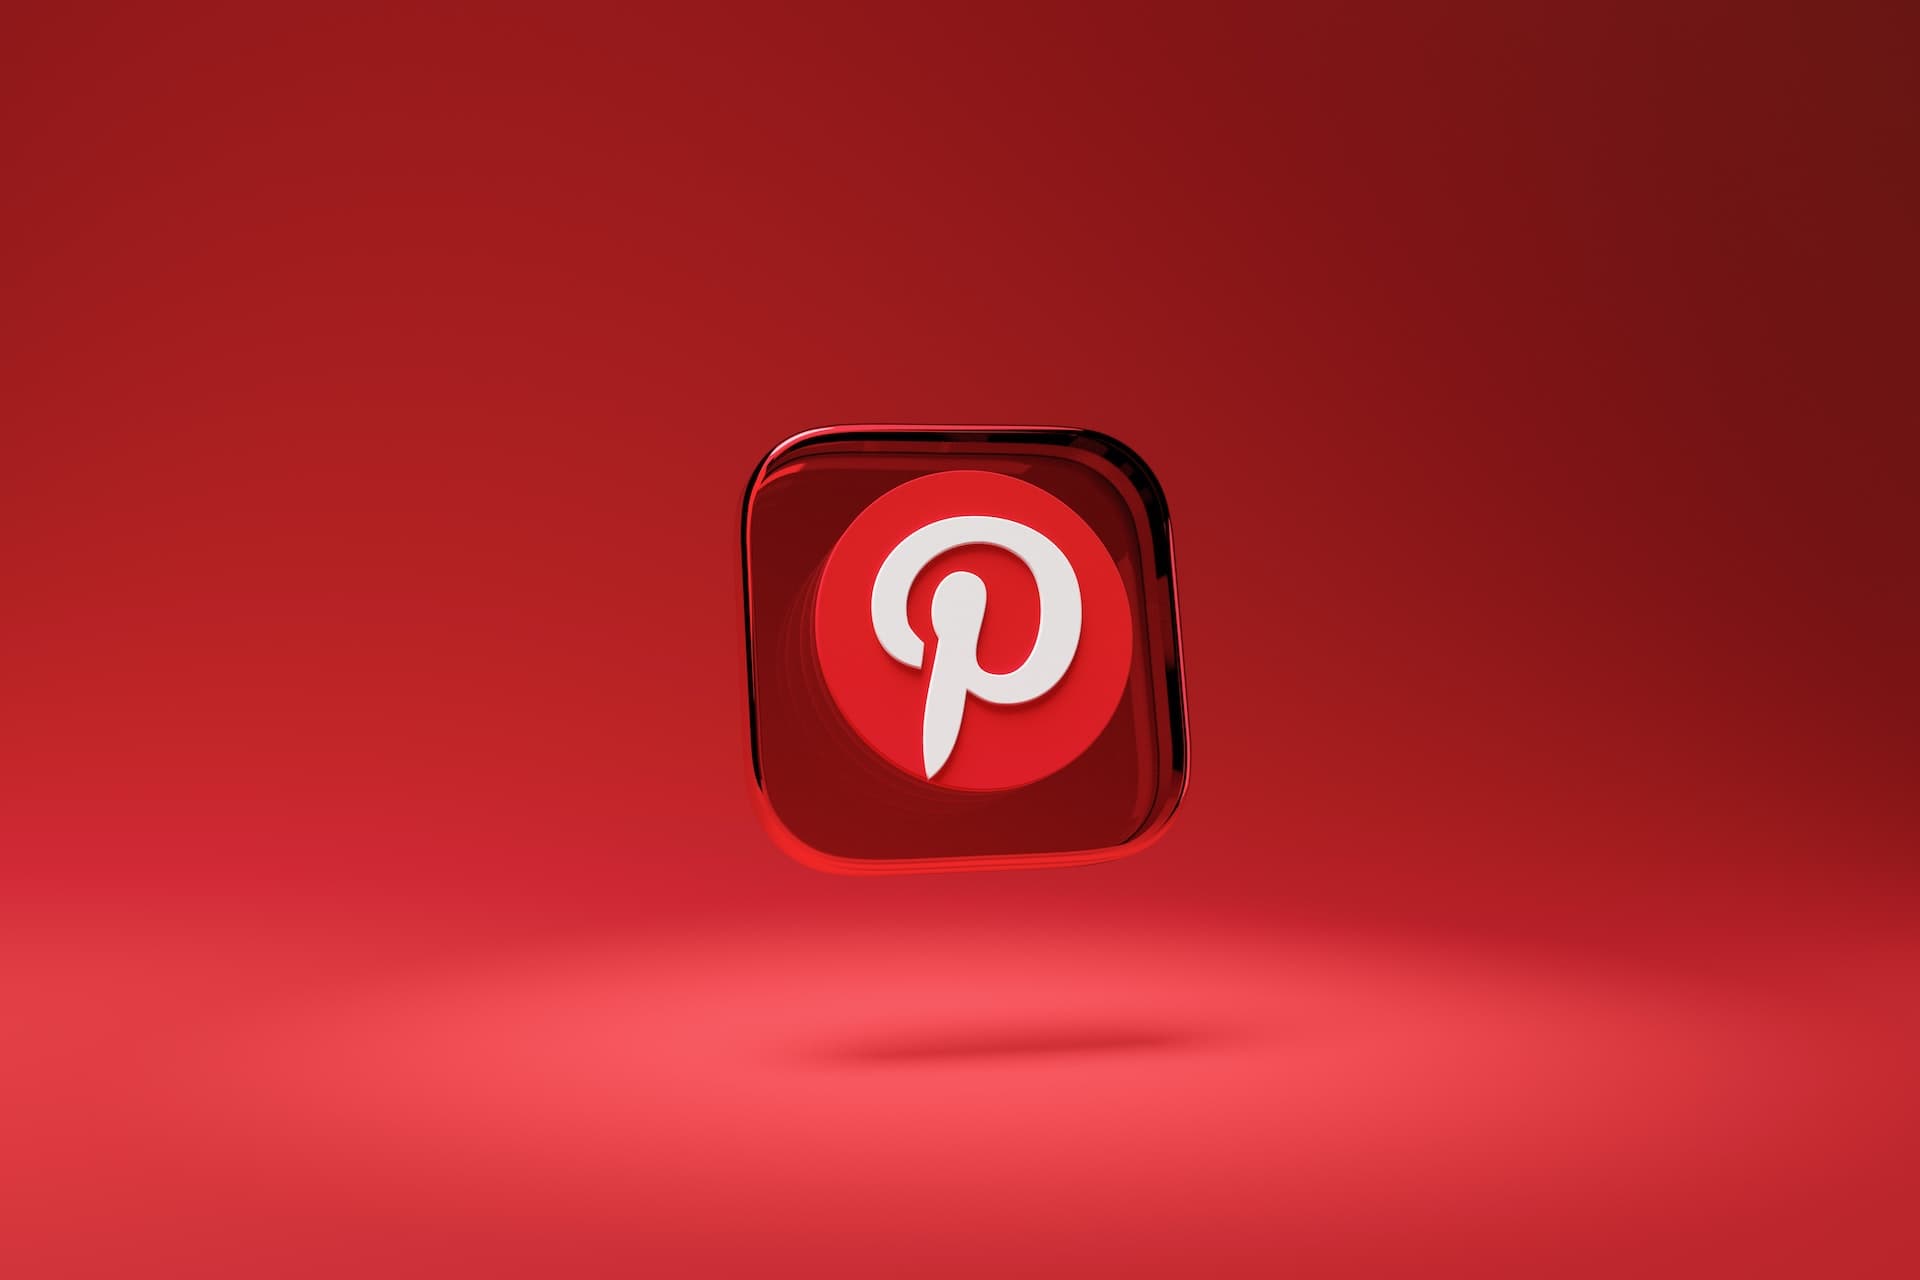 Can Pinterest Challenge Google in Visual Search?